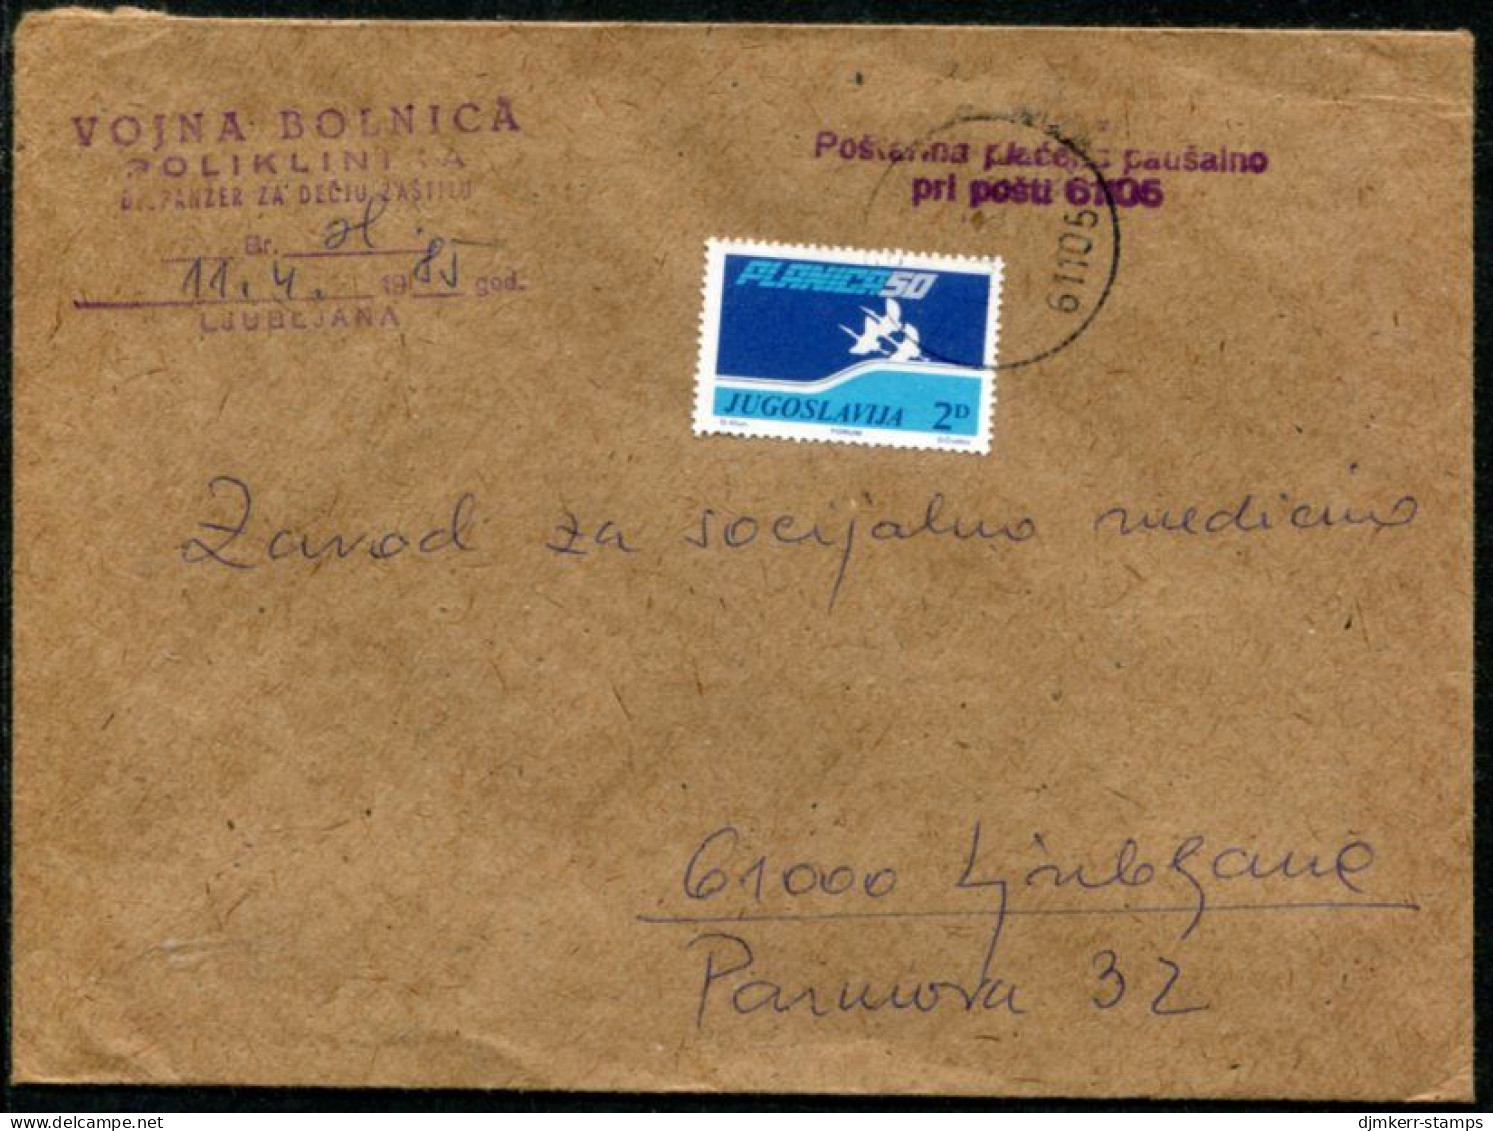 YUGOSLAVIA 1985 Ski-jumping Championship. Tax Used On Commercial Stampless Cover.  Michel ZZM 93 - Charity Issues